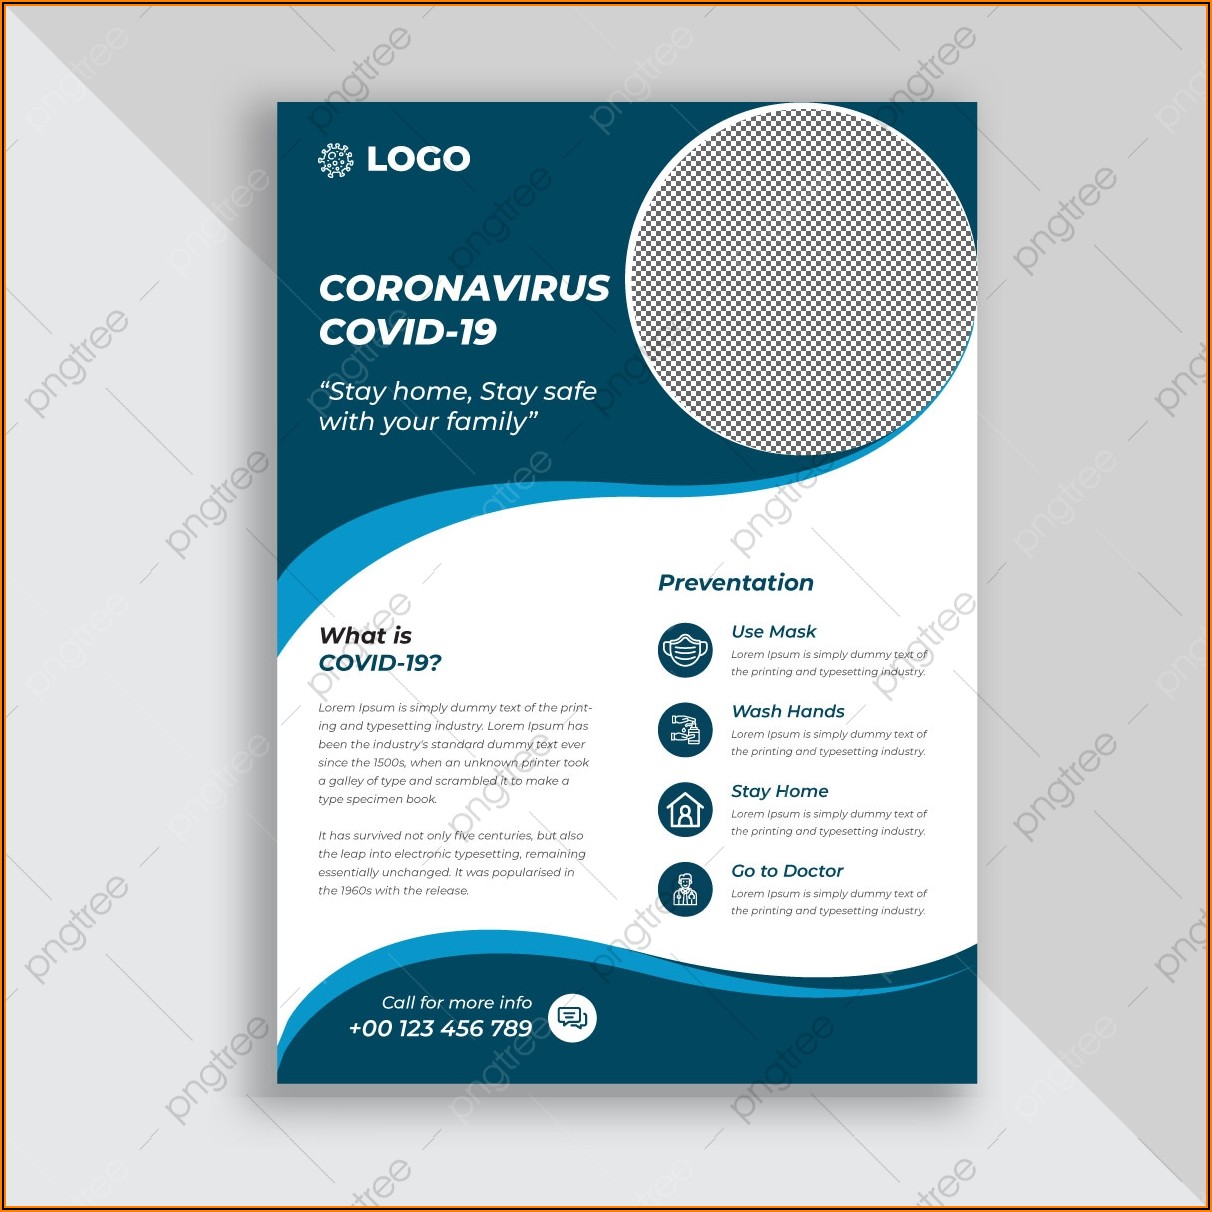 Medical Conference Flyer Template